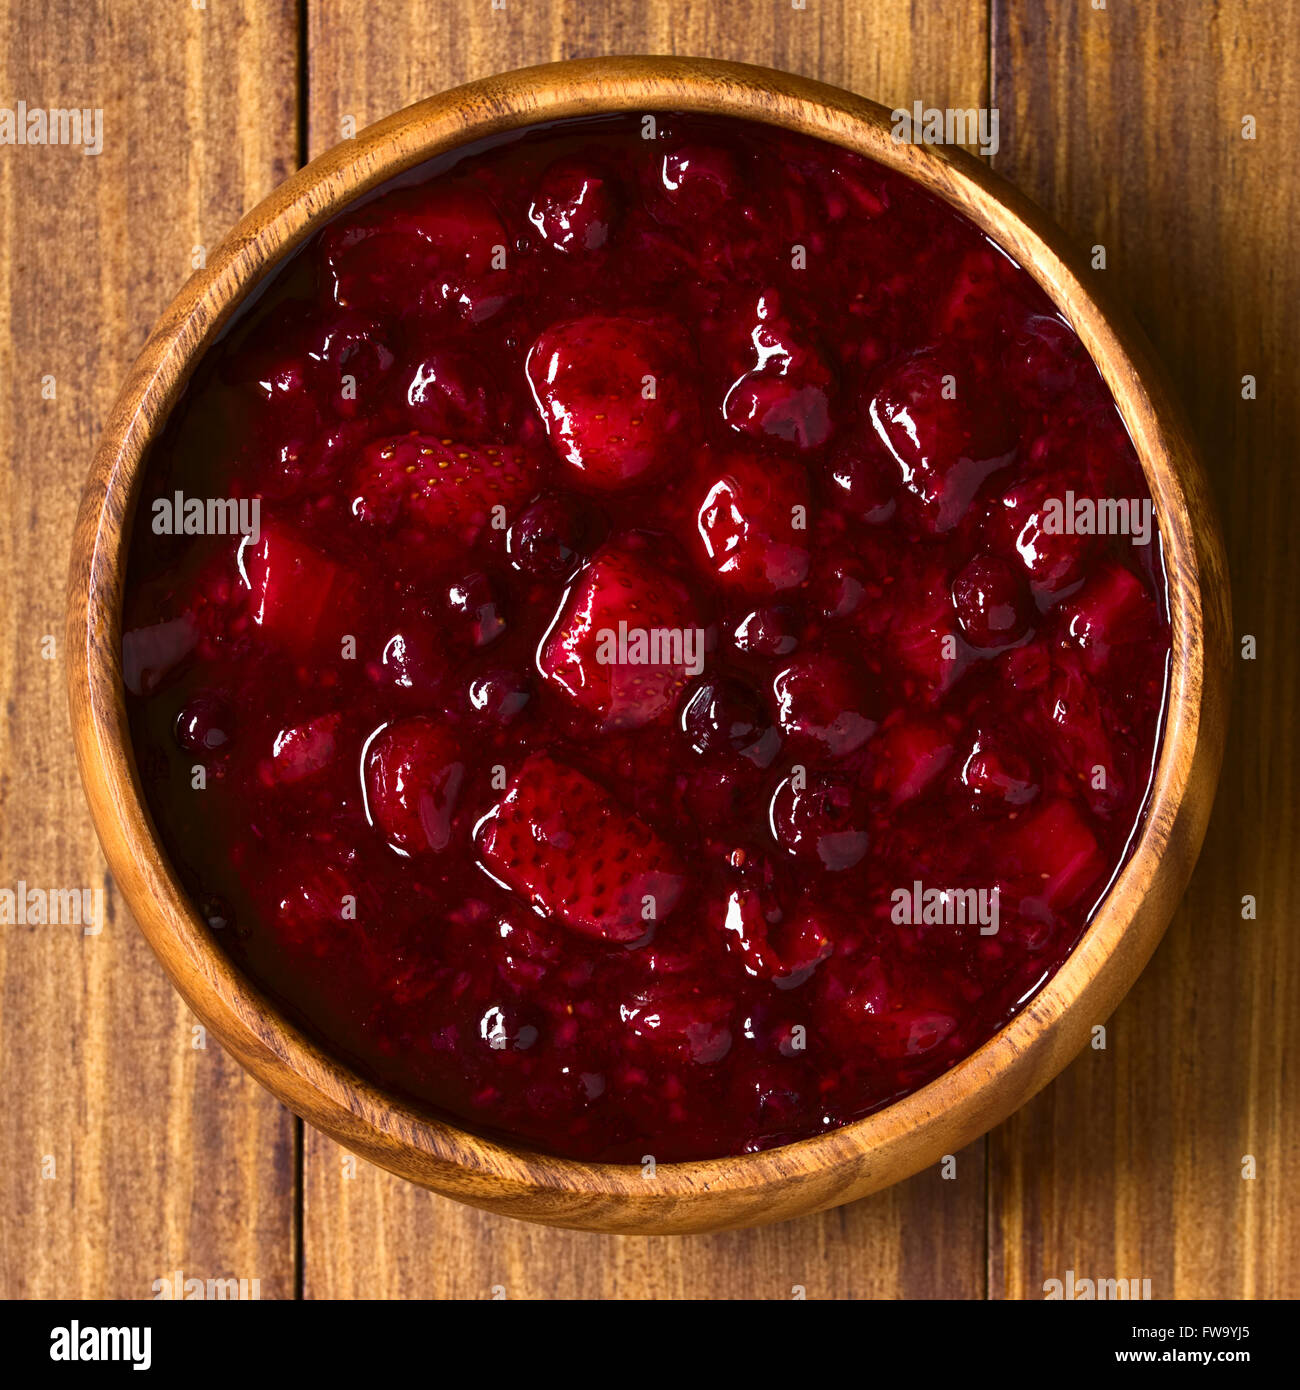 German Rote Gruetze (red groats) red berry pudding made of strawberry, blueberry, raspberry and redcurrants Stock Photo